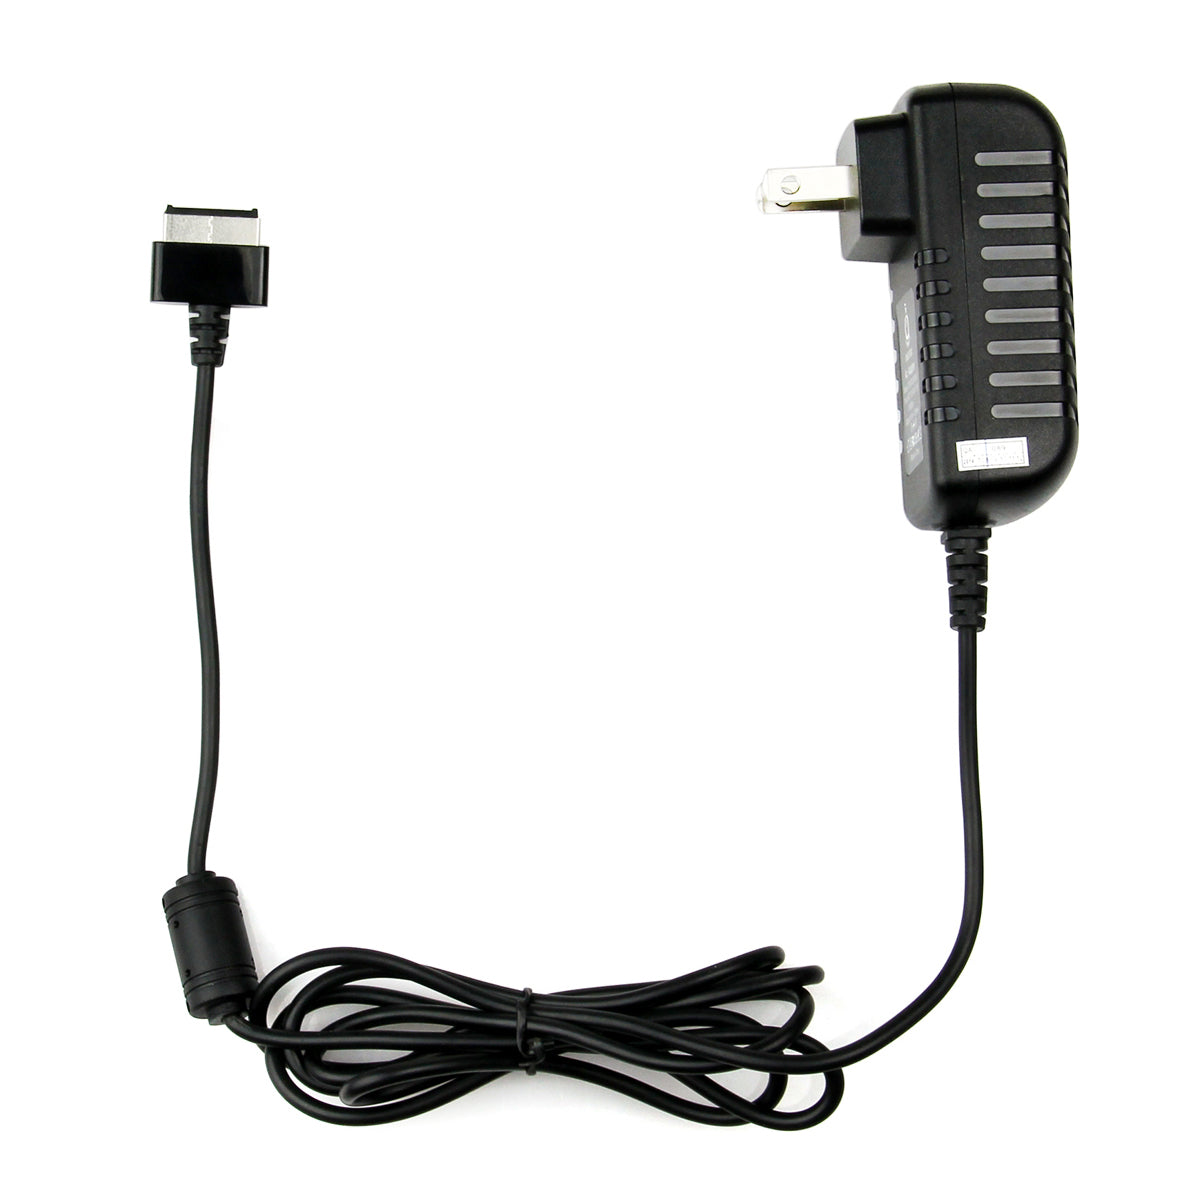 AC Adapter Charger for ASUS Eee Pad Transformer TF300T.